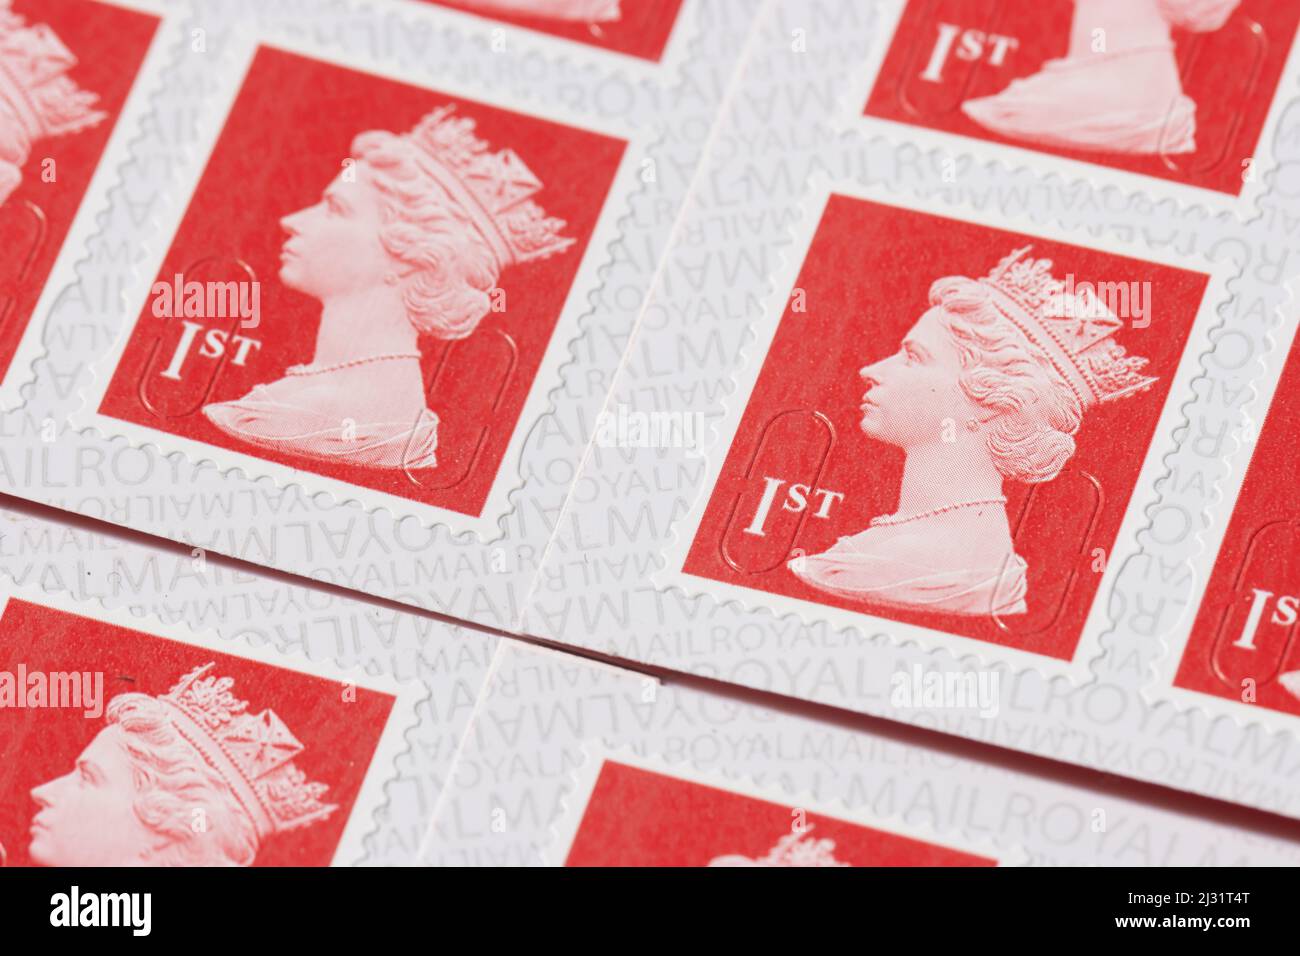 Close up of some 1st class stamps Stock Photo